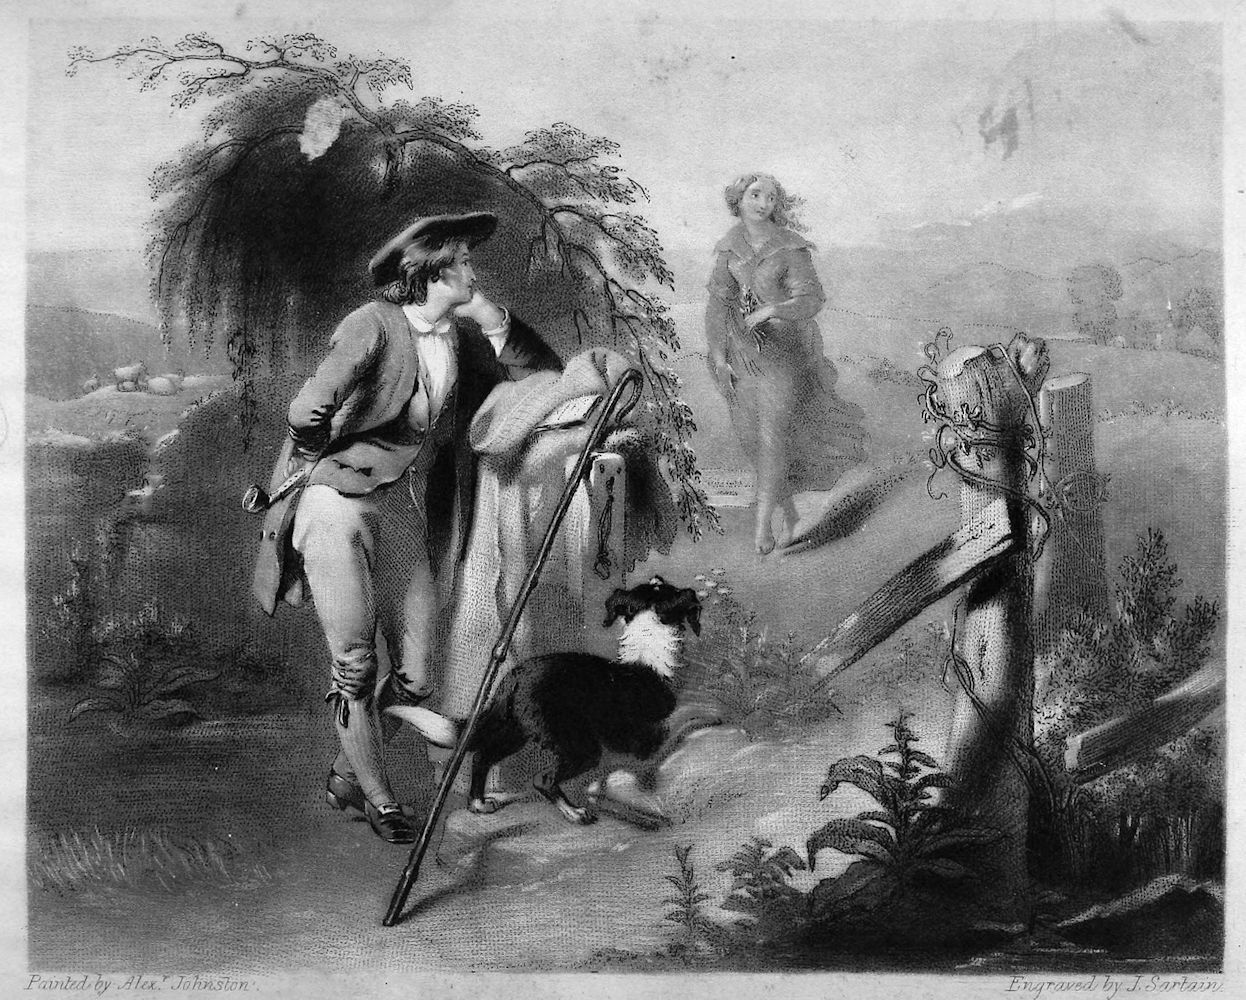 A man and dog watch a lady approaching